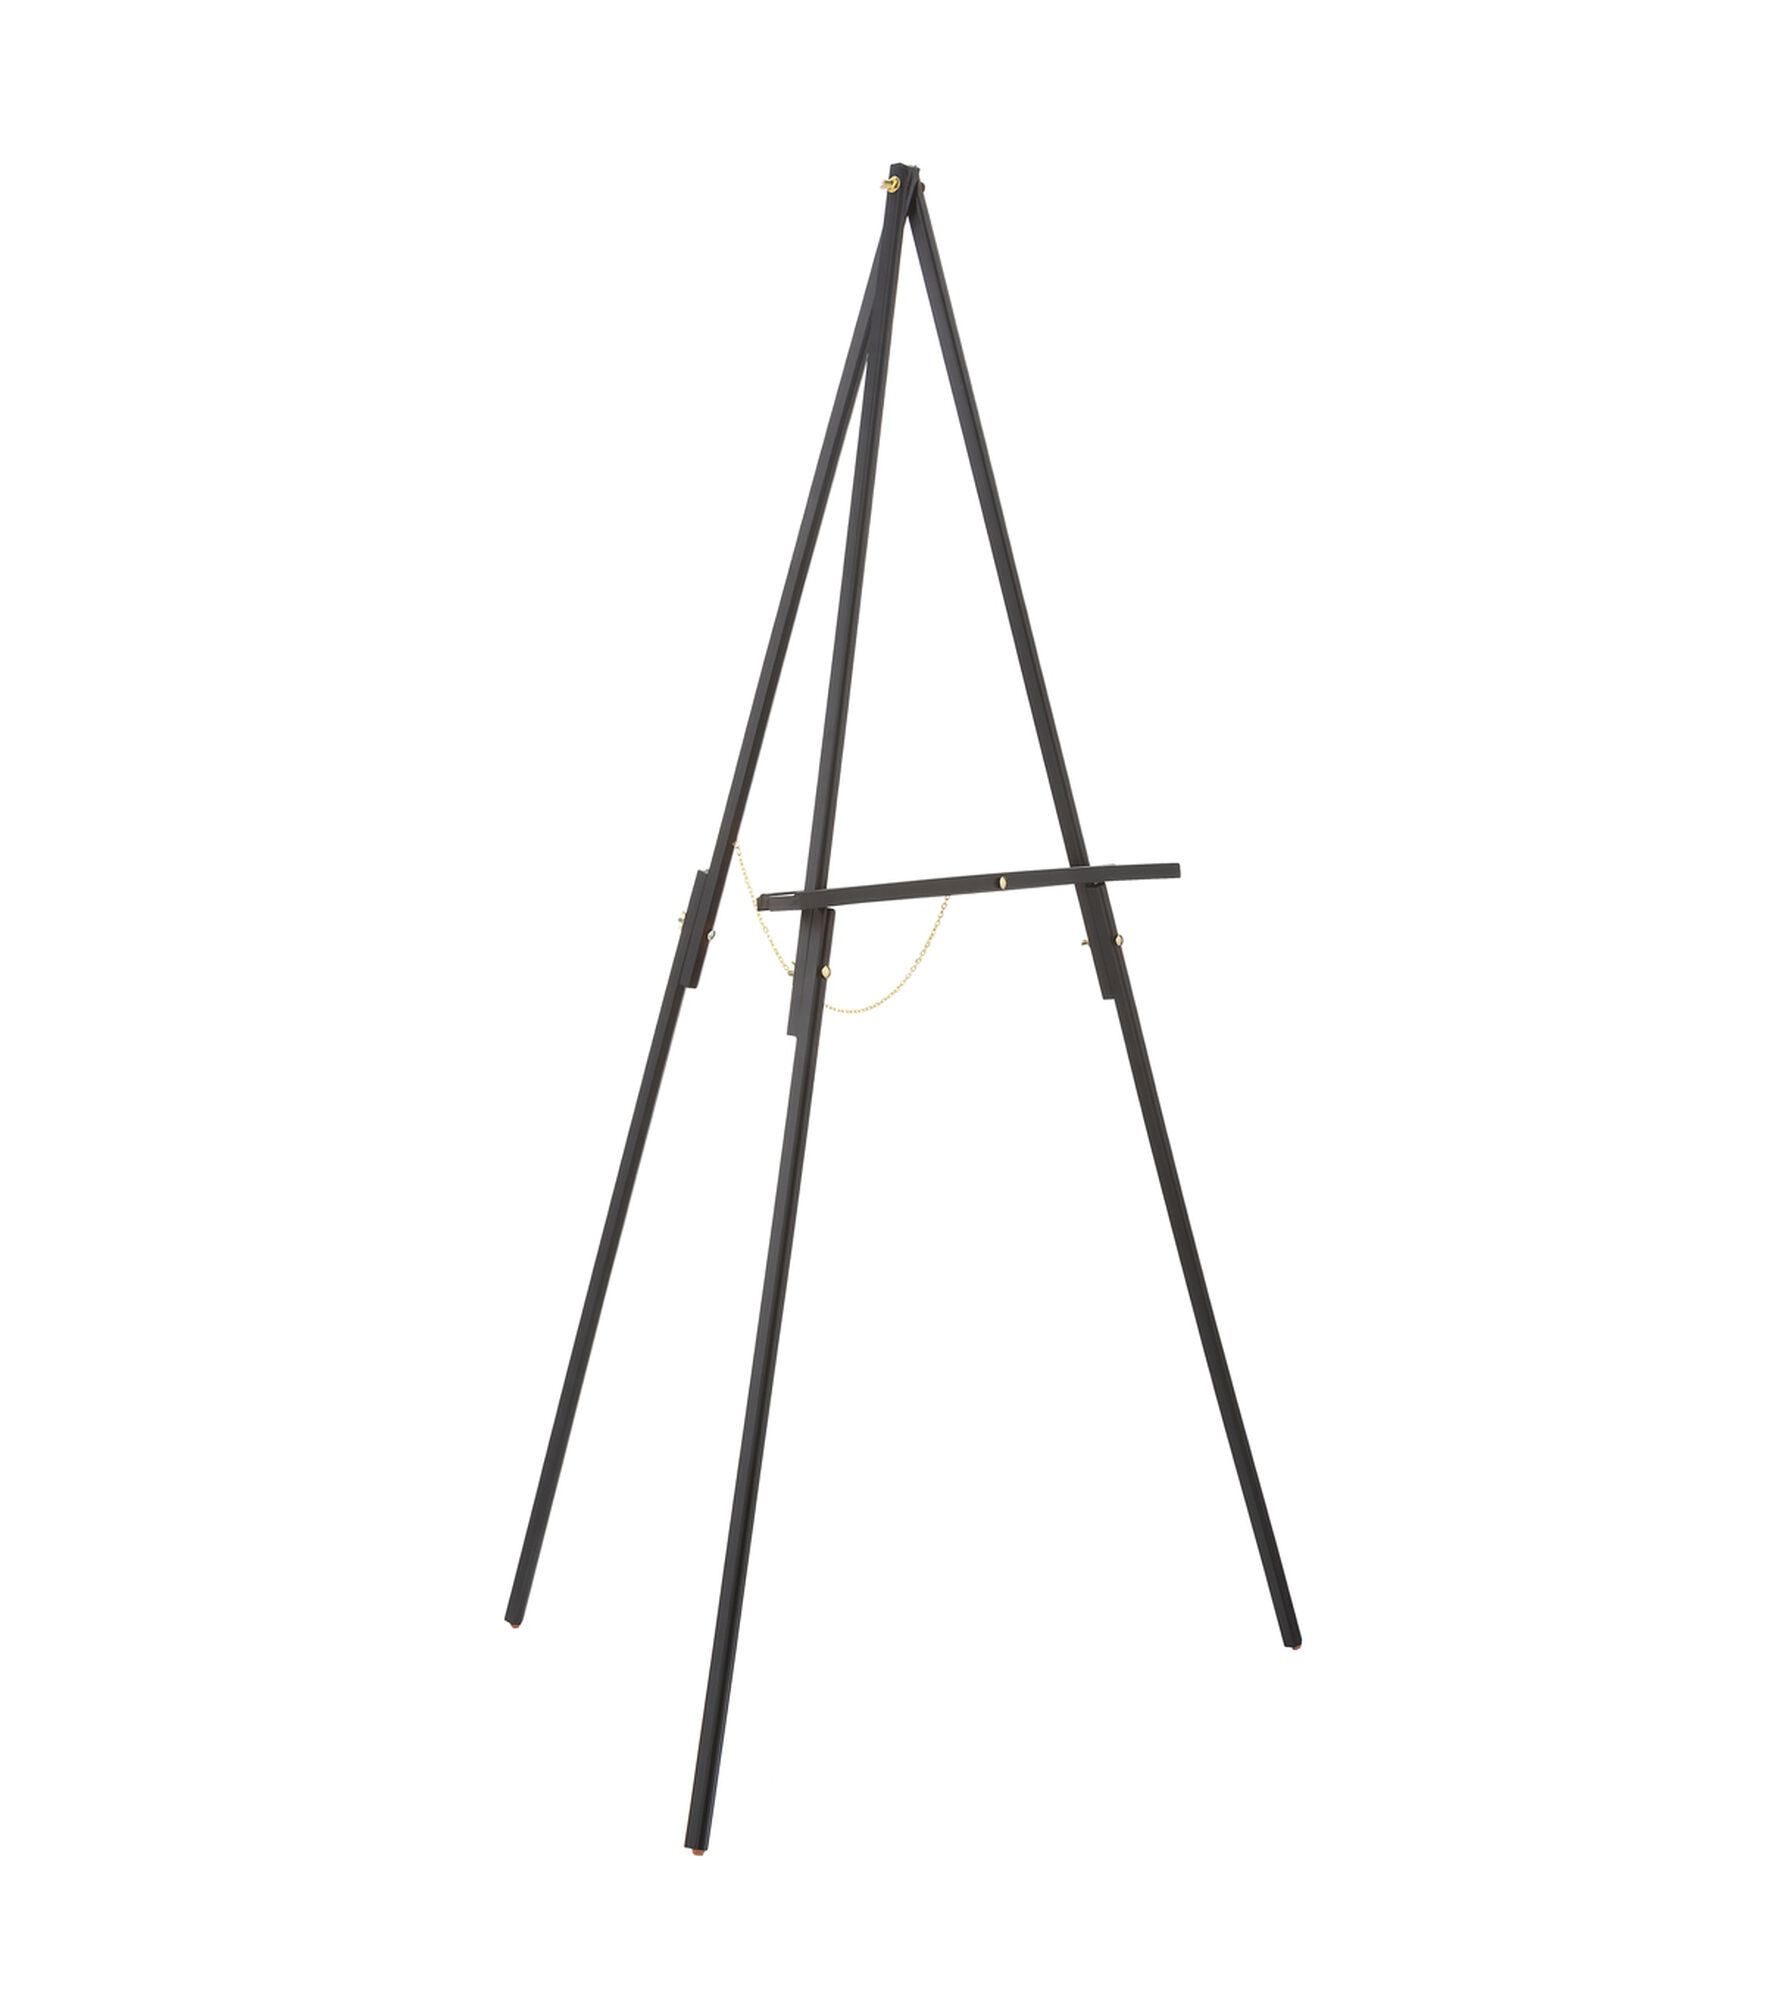 60" Wood Stained Adjustable Sketch Easel Stand by Artsmith, Black 60in, hi-res